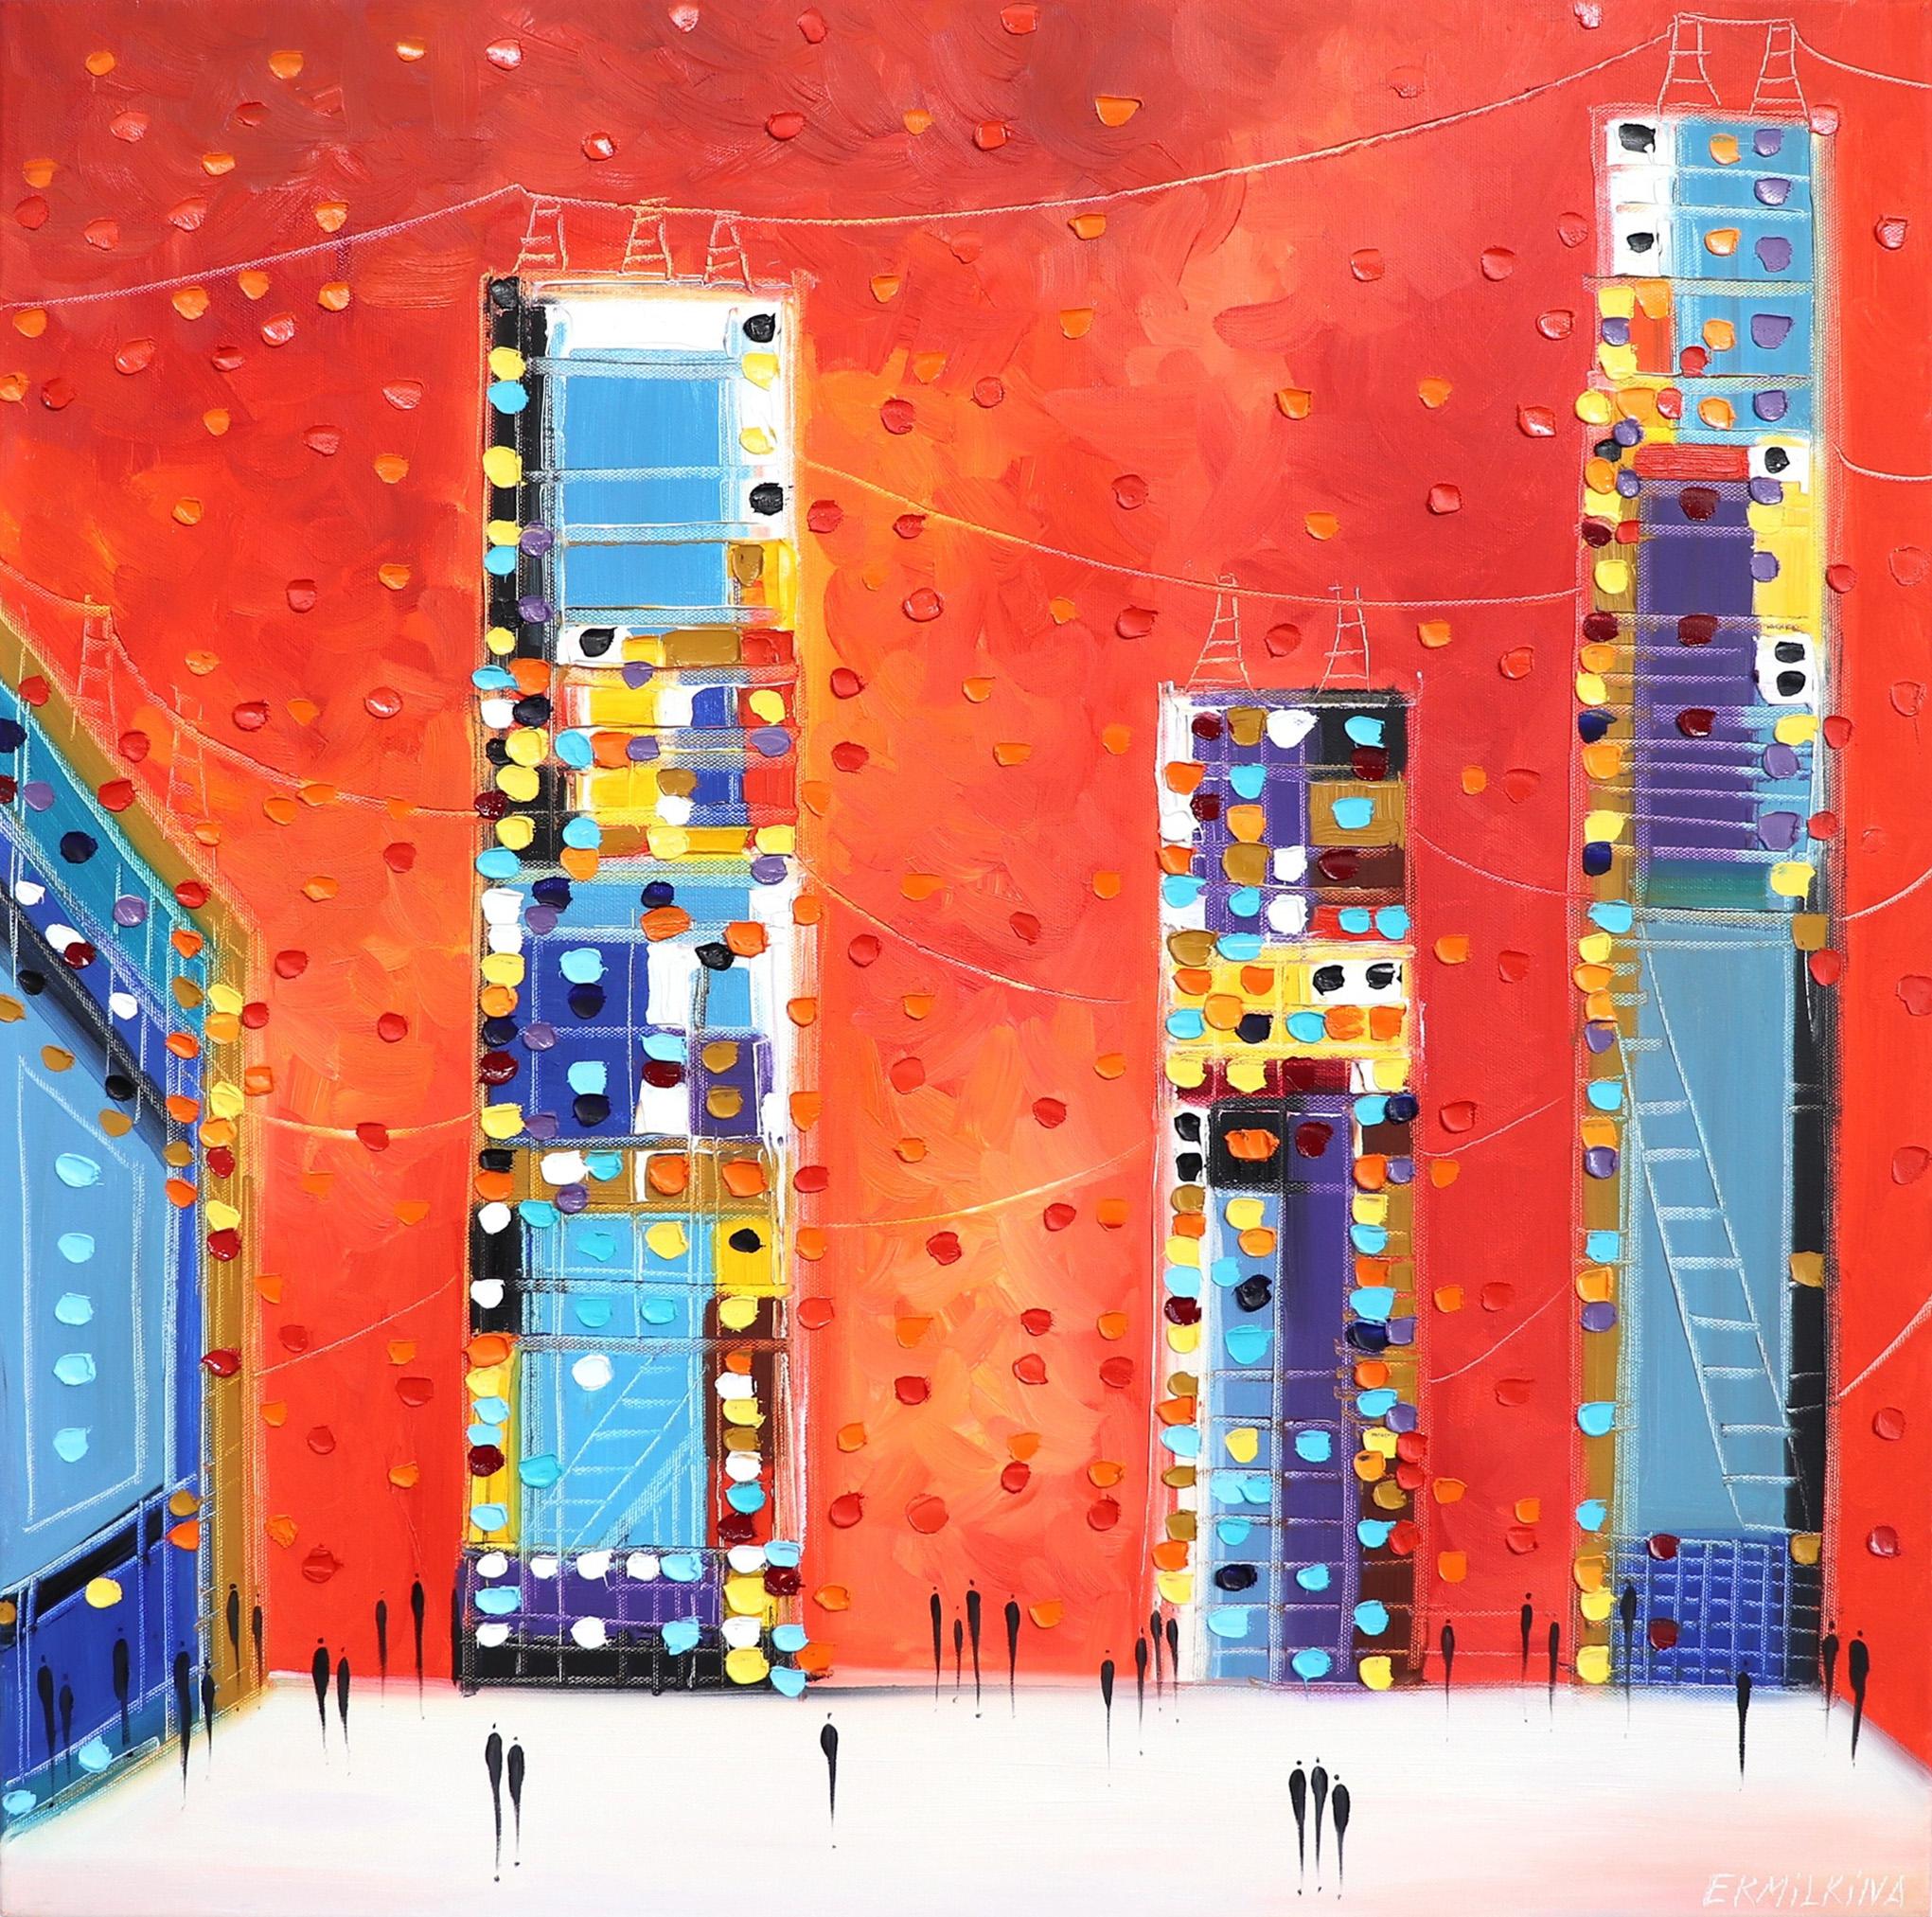 Ekaterina Ermilkina Abstract Painting - Night City - Colorful Original Oil Painting